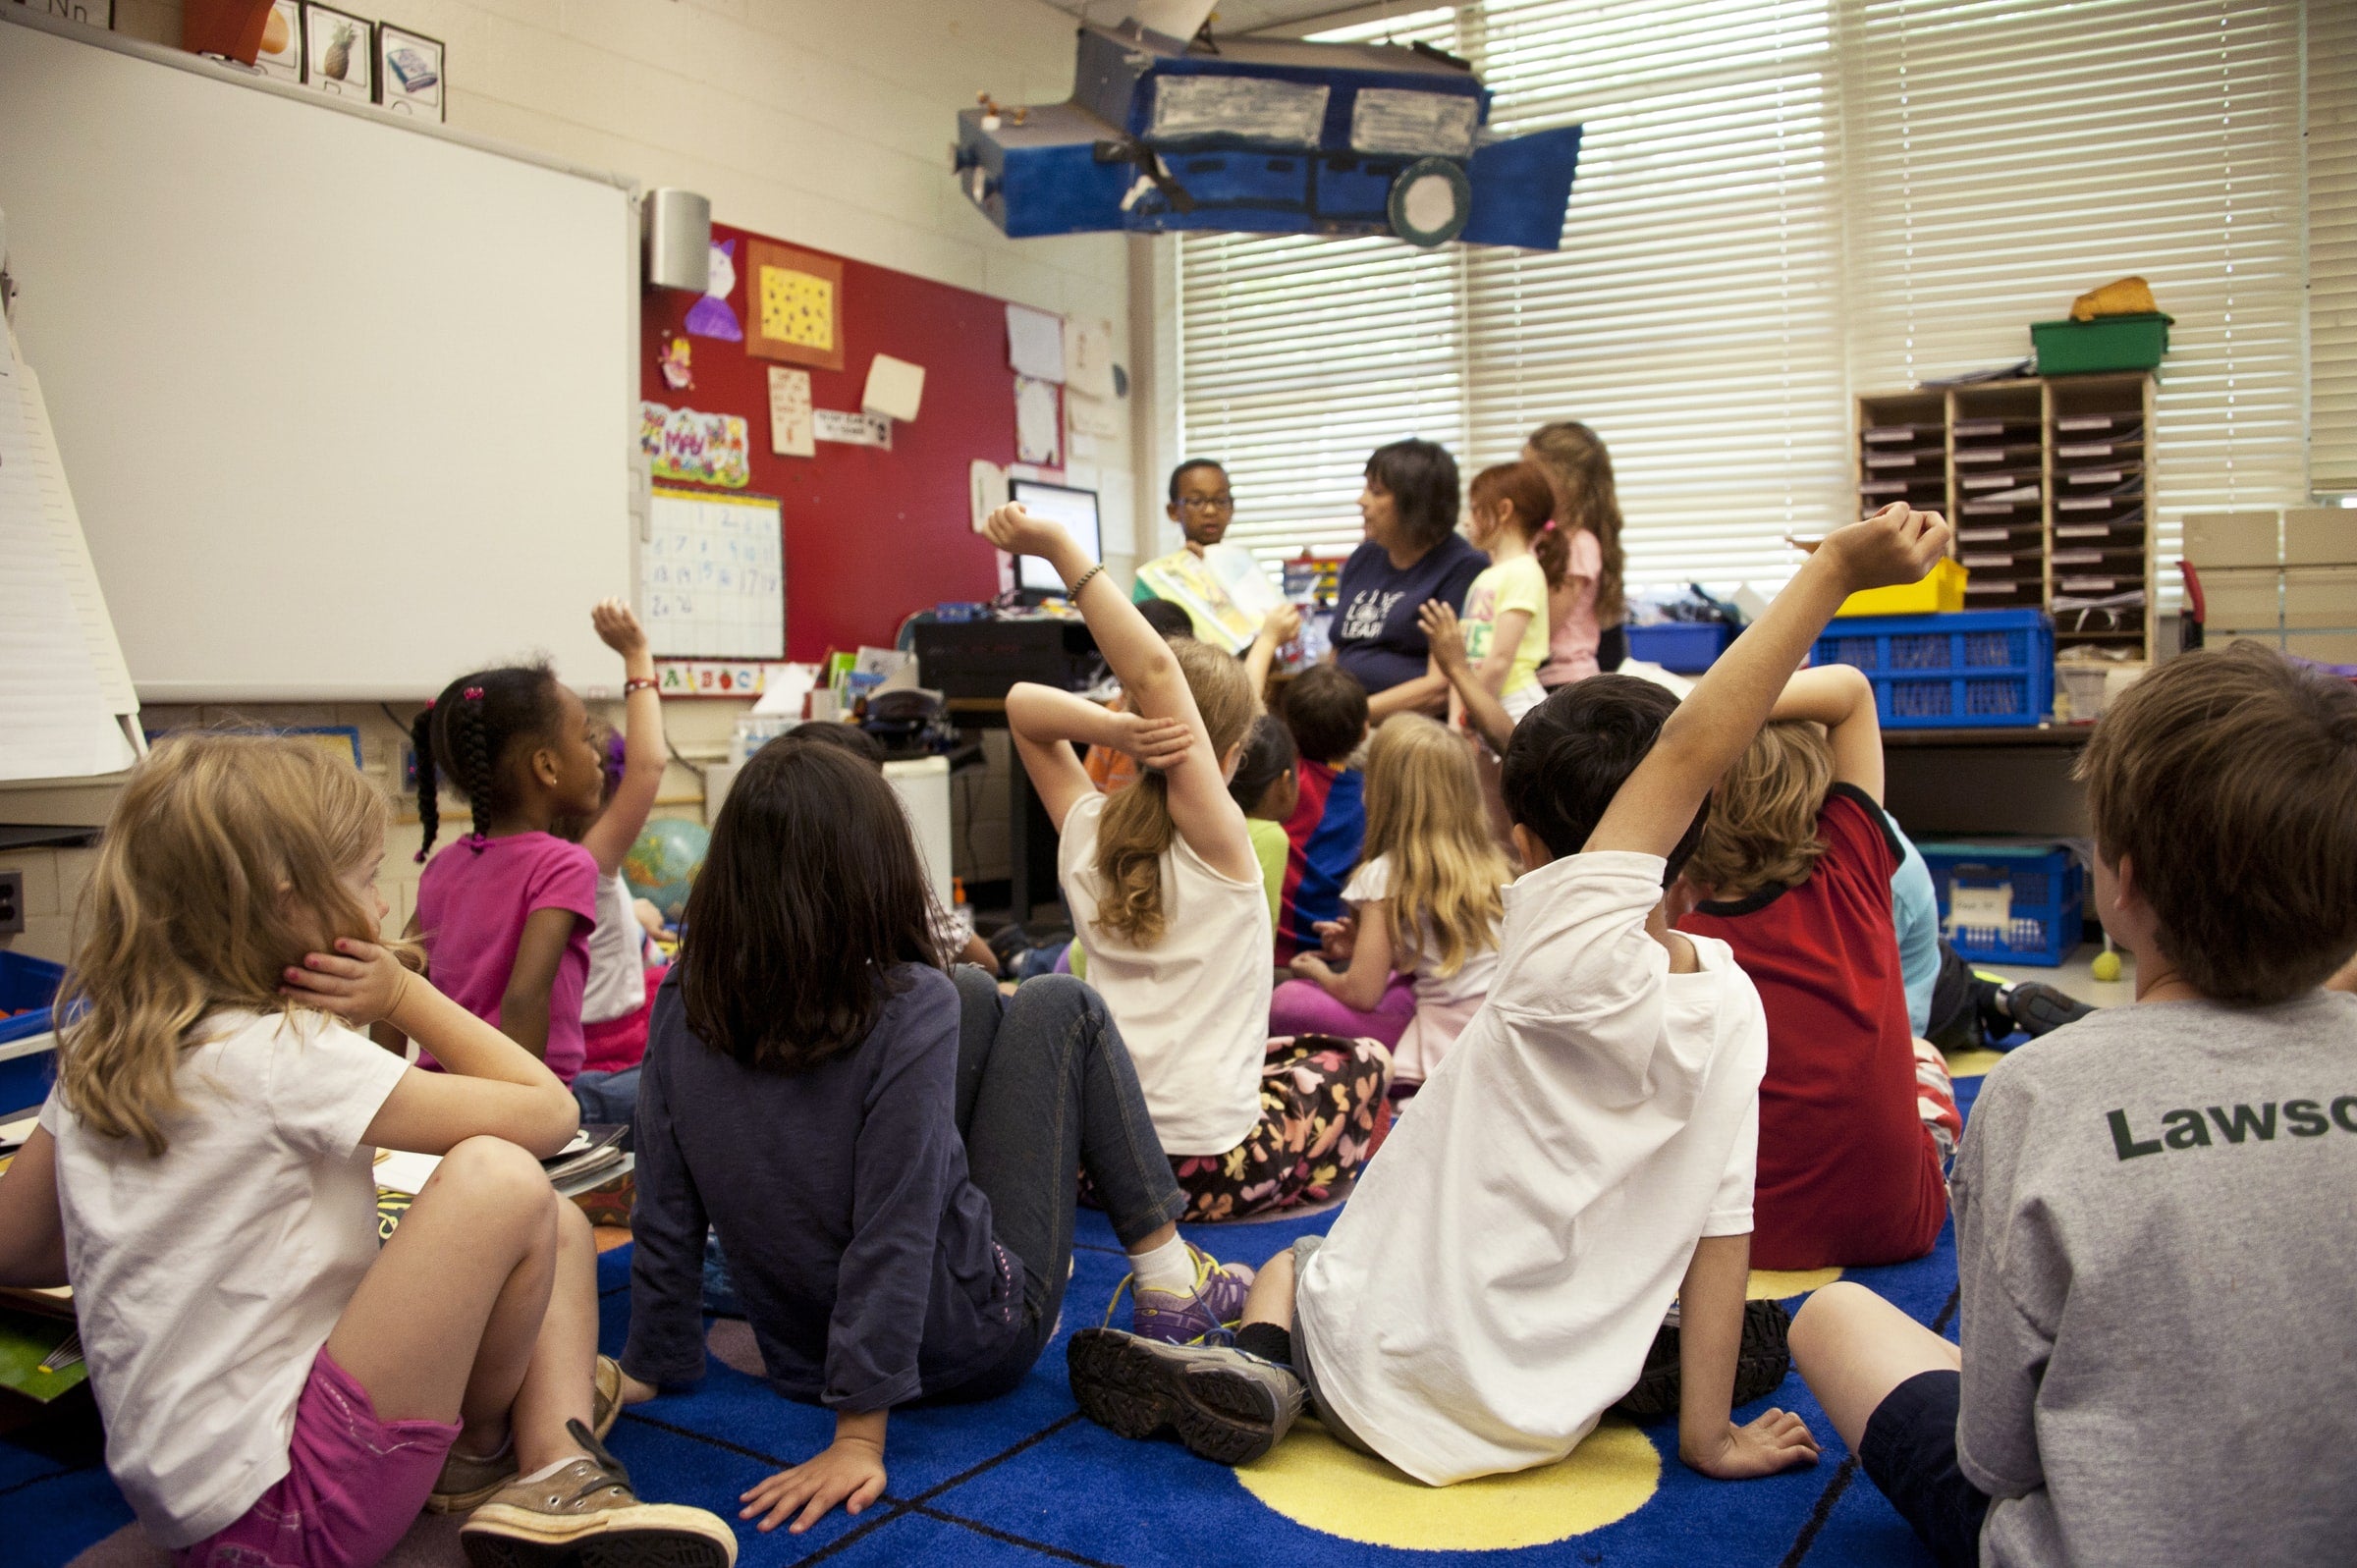 Captured in a metropolitan Atlanta, Georgia primary school, this photograph depicts a typical classroom scene, where an audience of school children were seated on the floor before a teacher at the front of the room, who was reading an illustrated storybook, during one of the scheduled classroom sessions. Assisting the instructor were two female students to her left, and a male student on her right, who was holding up the book, while the seated classmates were raising their hands to answer questions related to the story just read. (Photo/CDC via Unsplash)